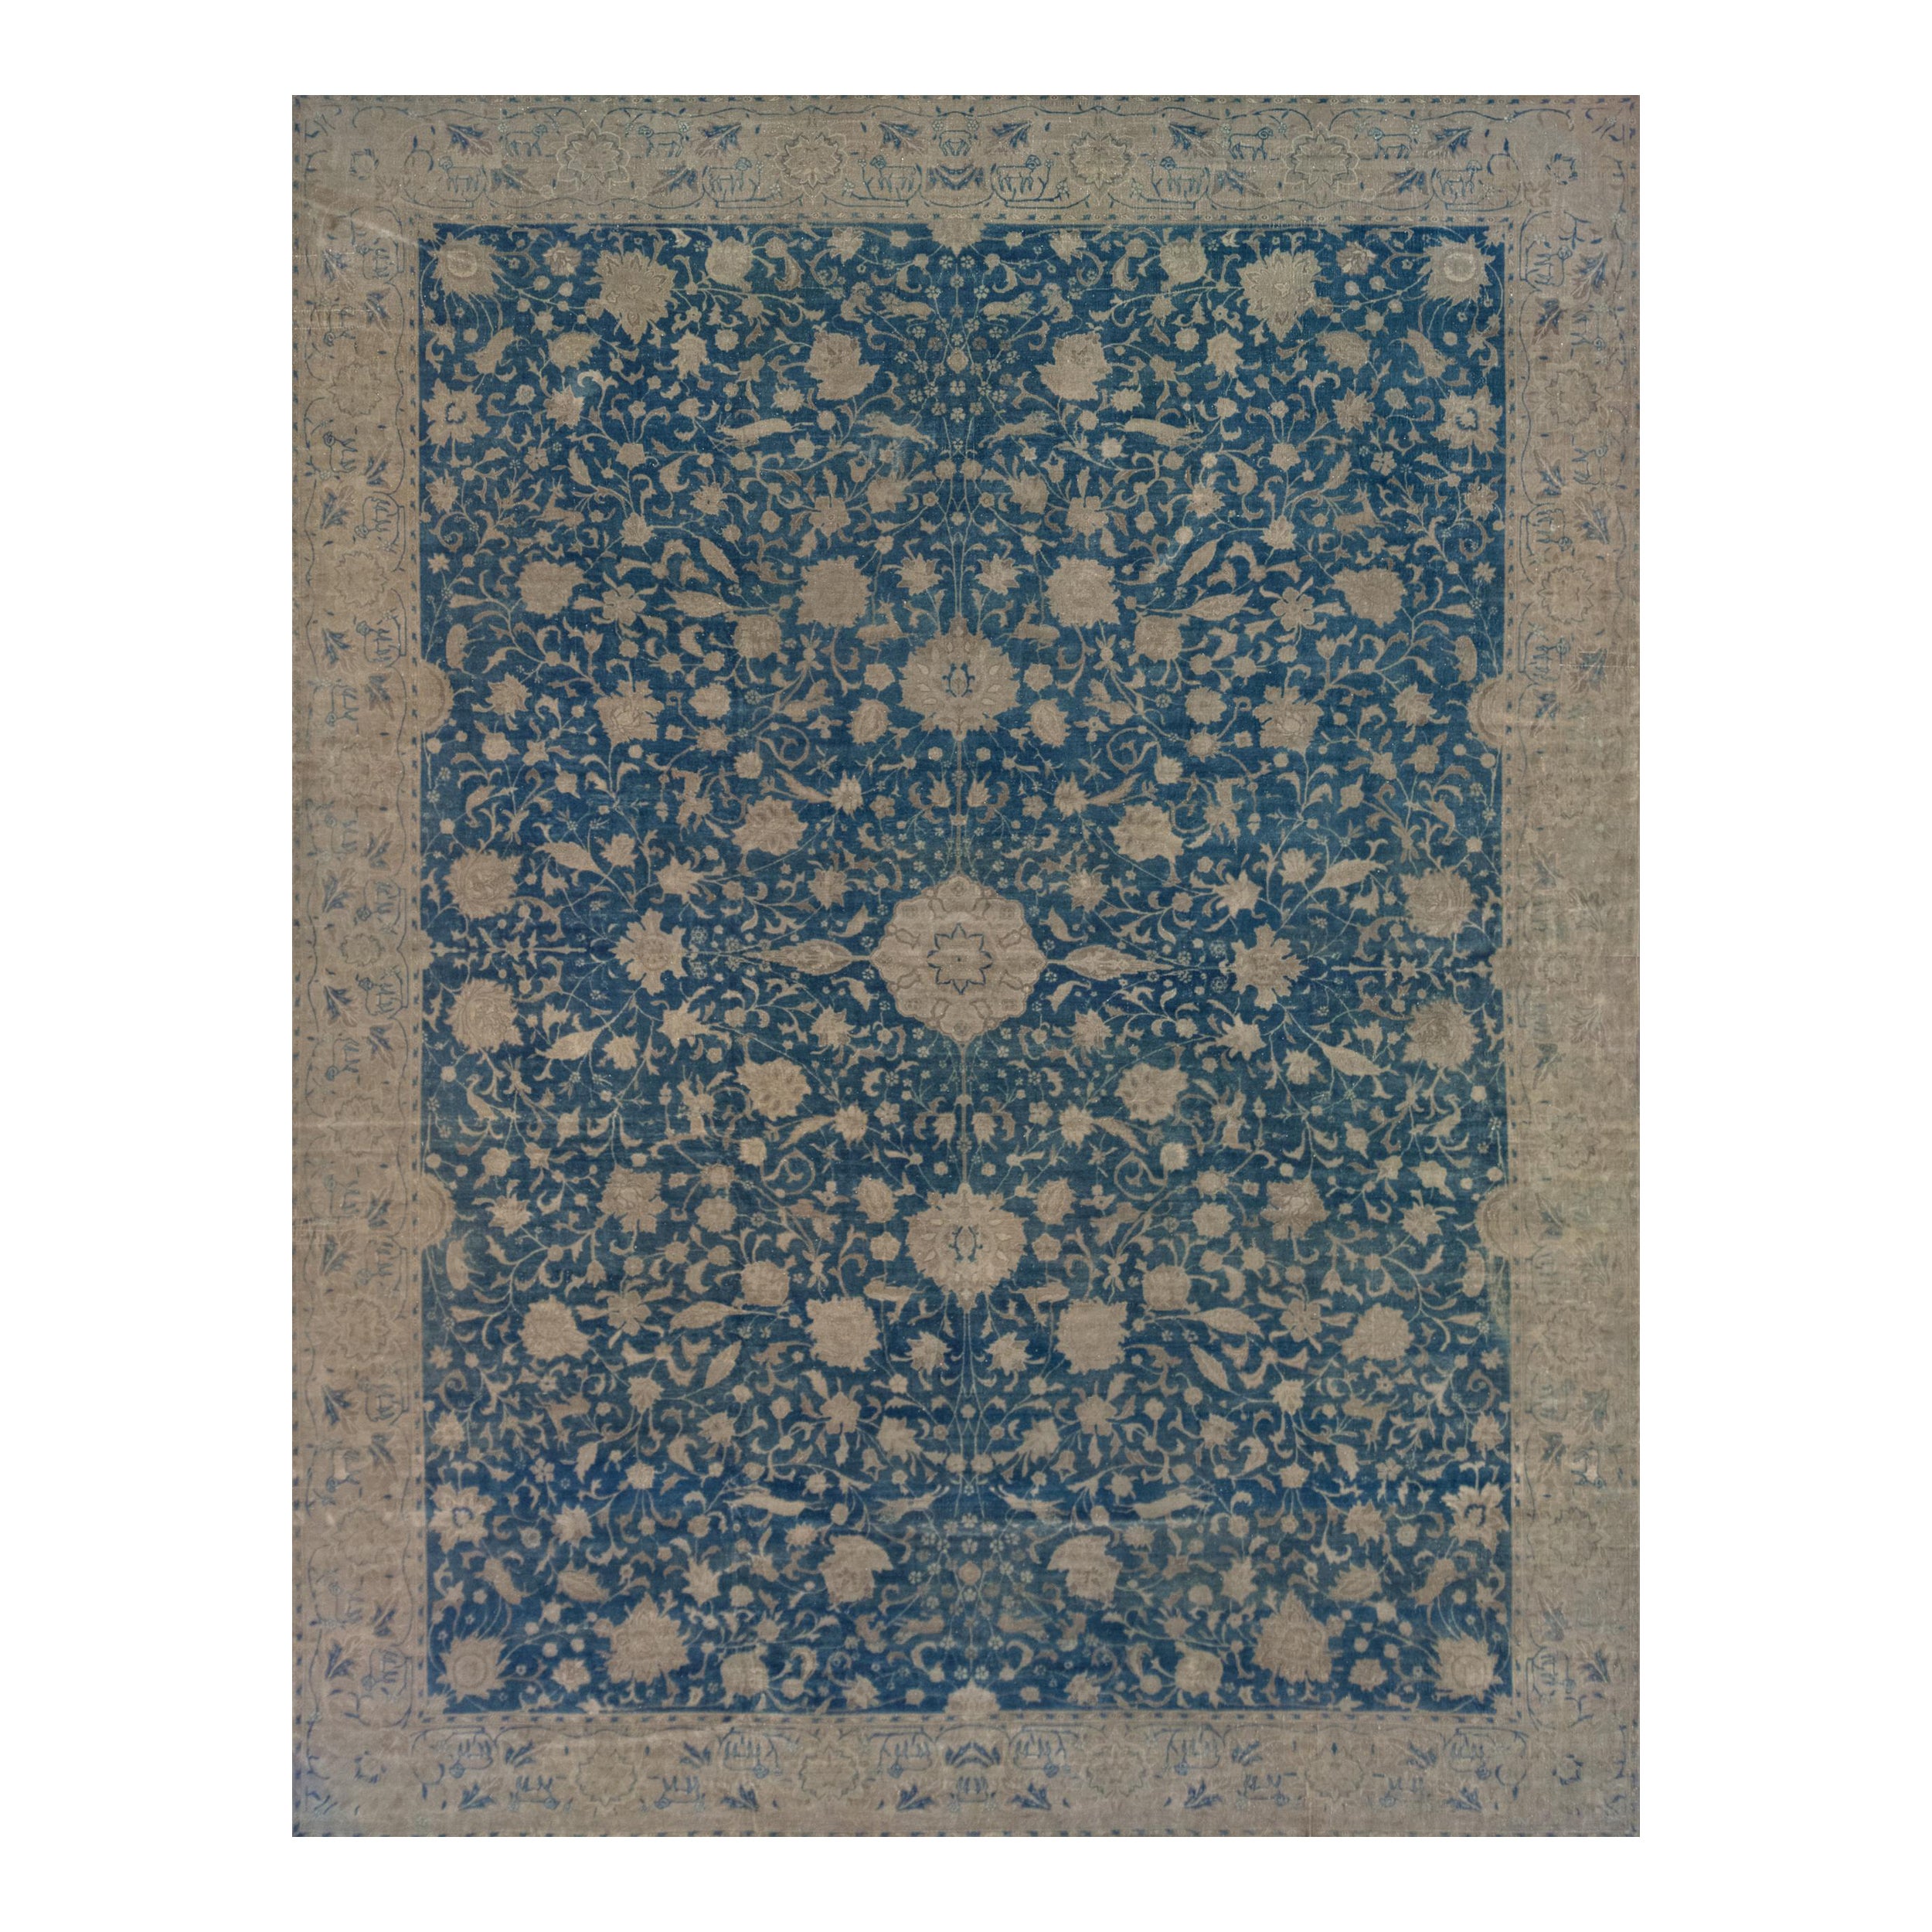 Hand-knotted Antique Circa-1900 Blue Floral Authentic Indian Agra Rug,  15'x20'